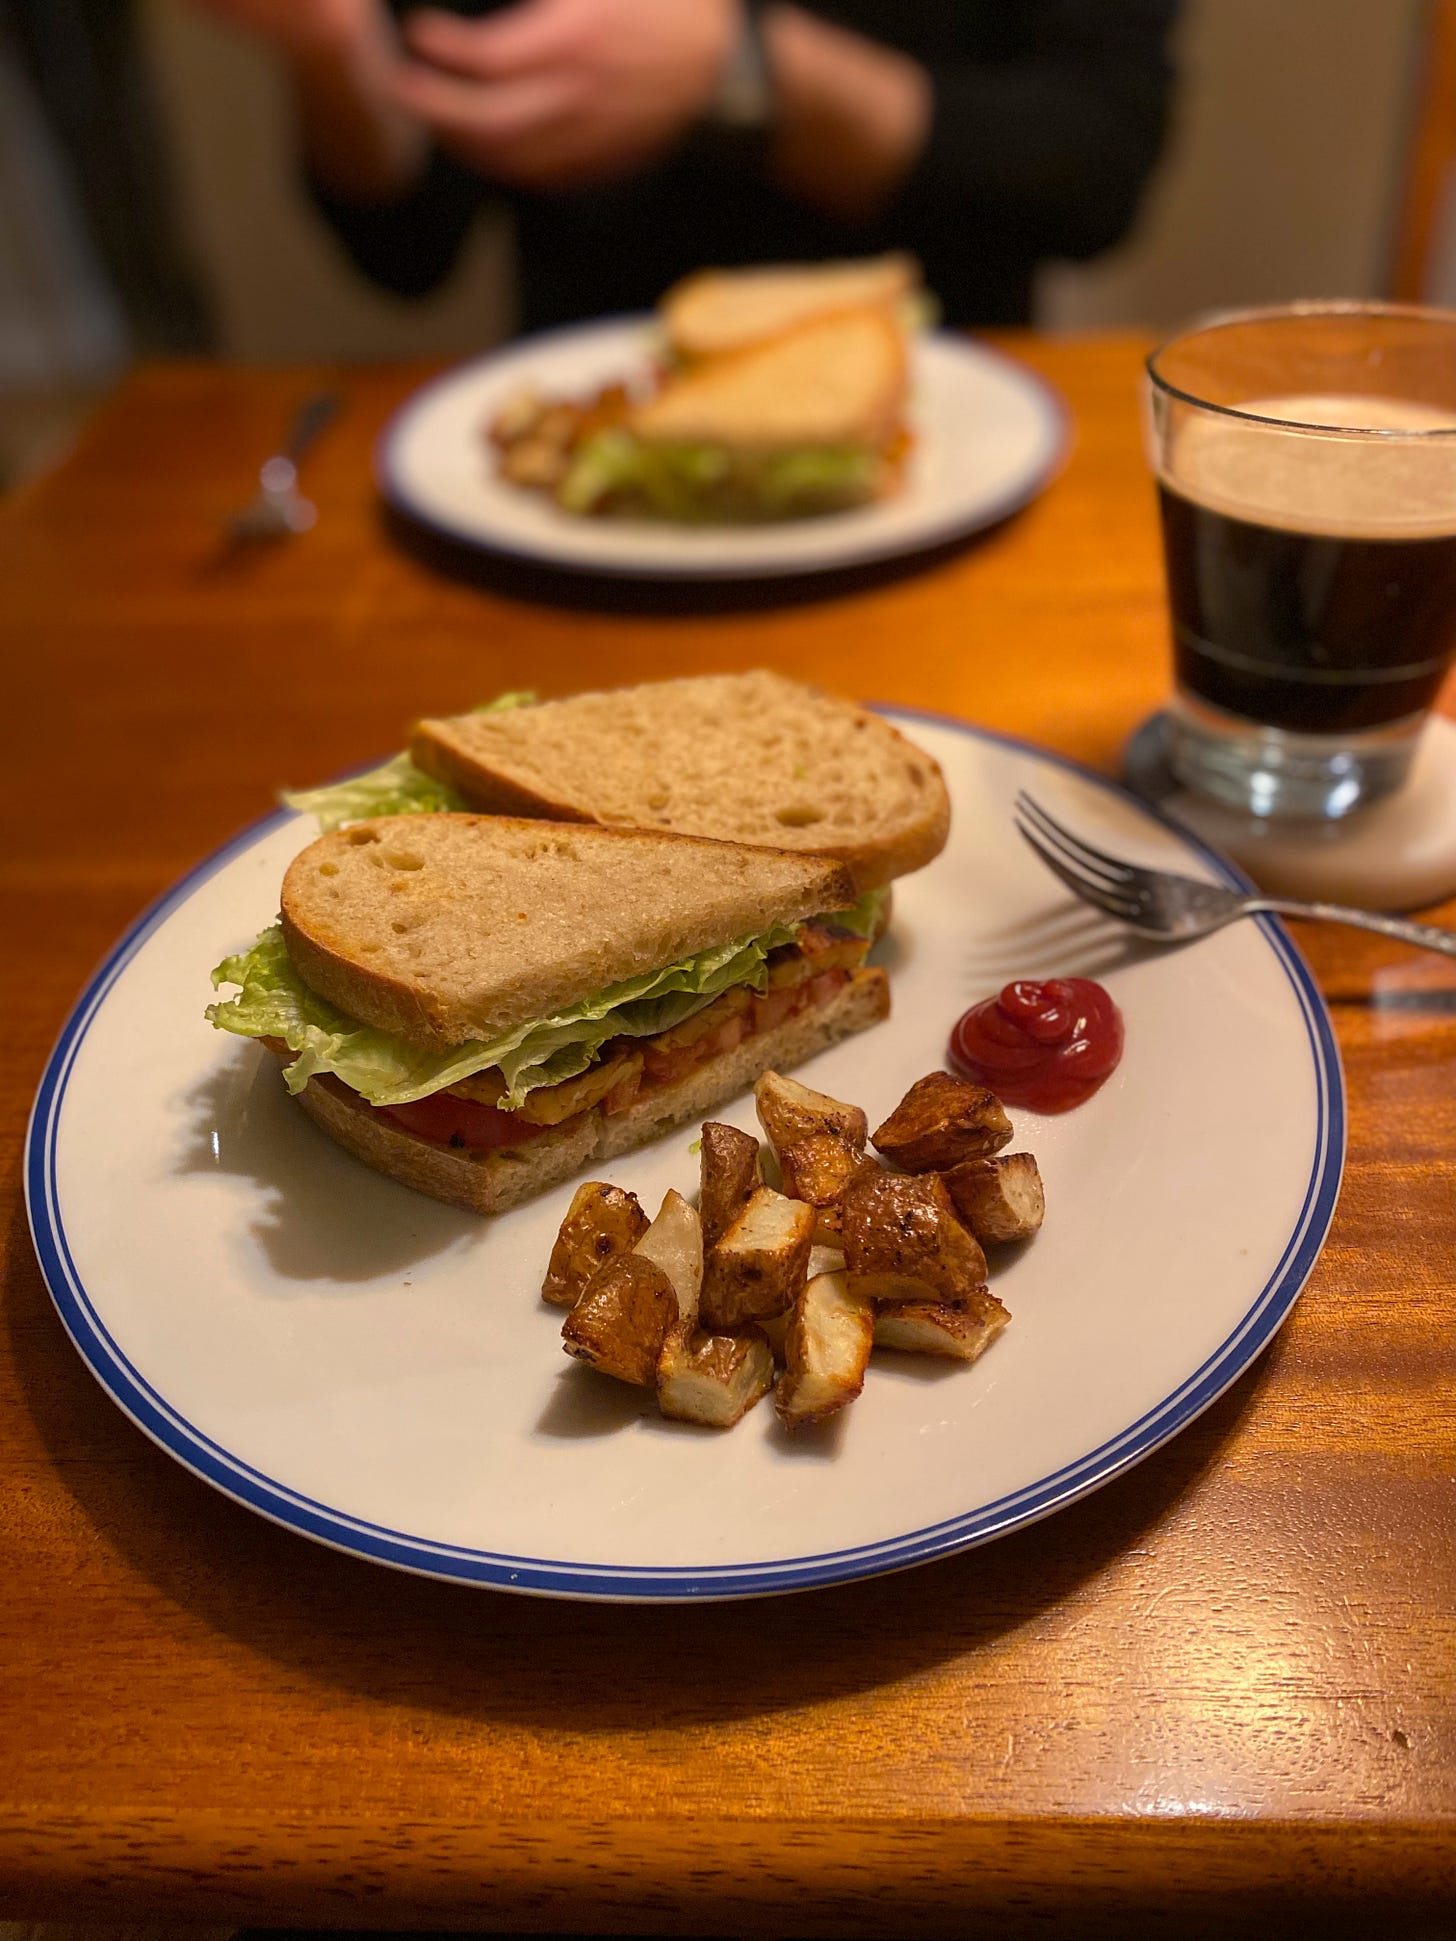 A large white plate with a blue rim holds a small pile of oven fries next to a blob of ketchup, and two halves of a tempeh BLT. Next to the plate on a coaster is a glass of dark beer. Jeff's hands are above his plate in the background, out of focus.